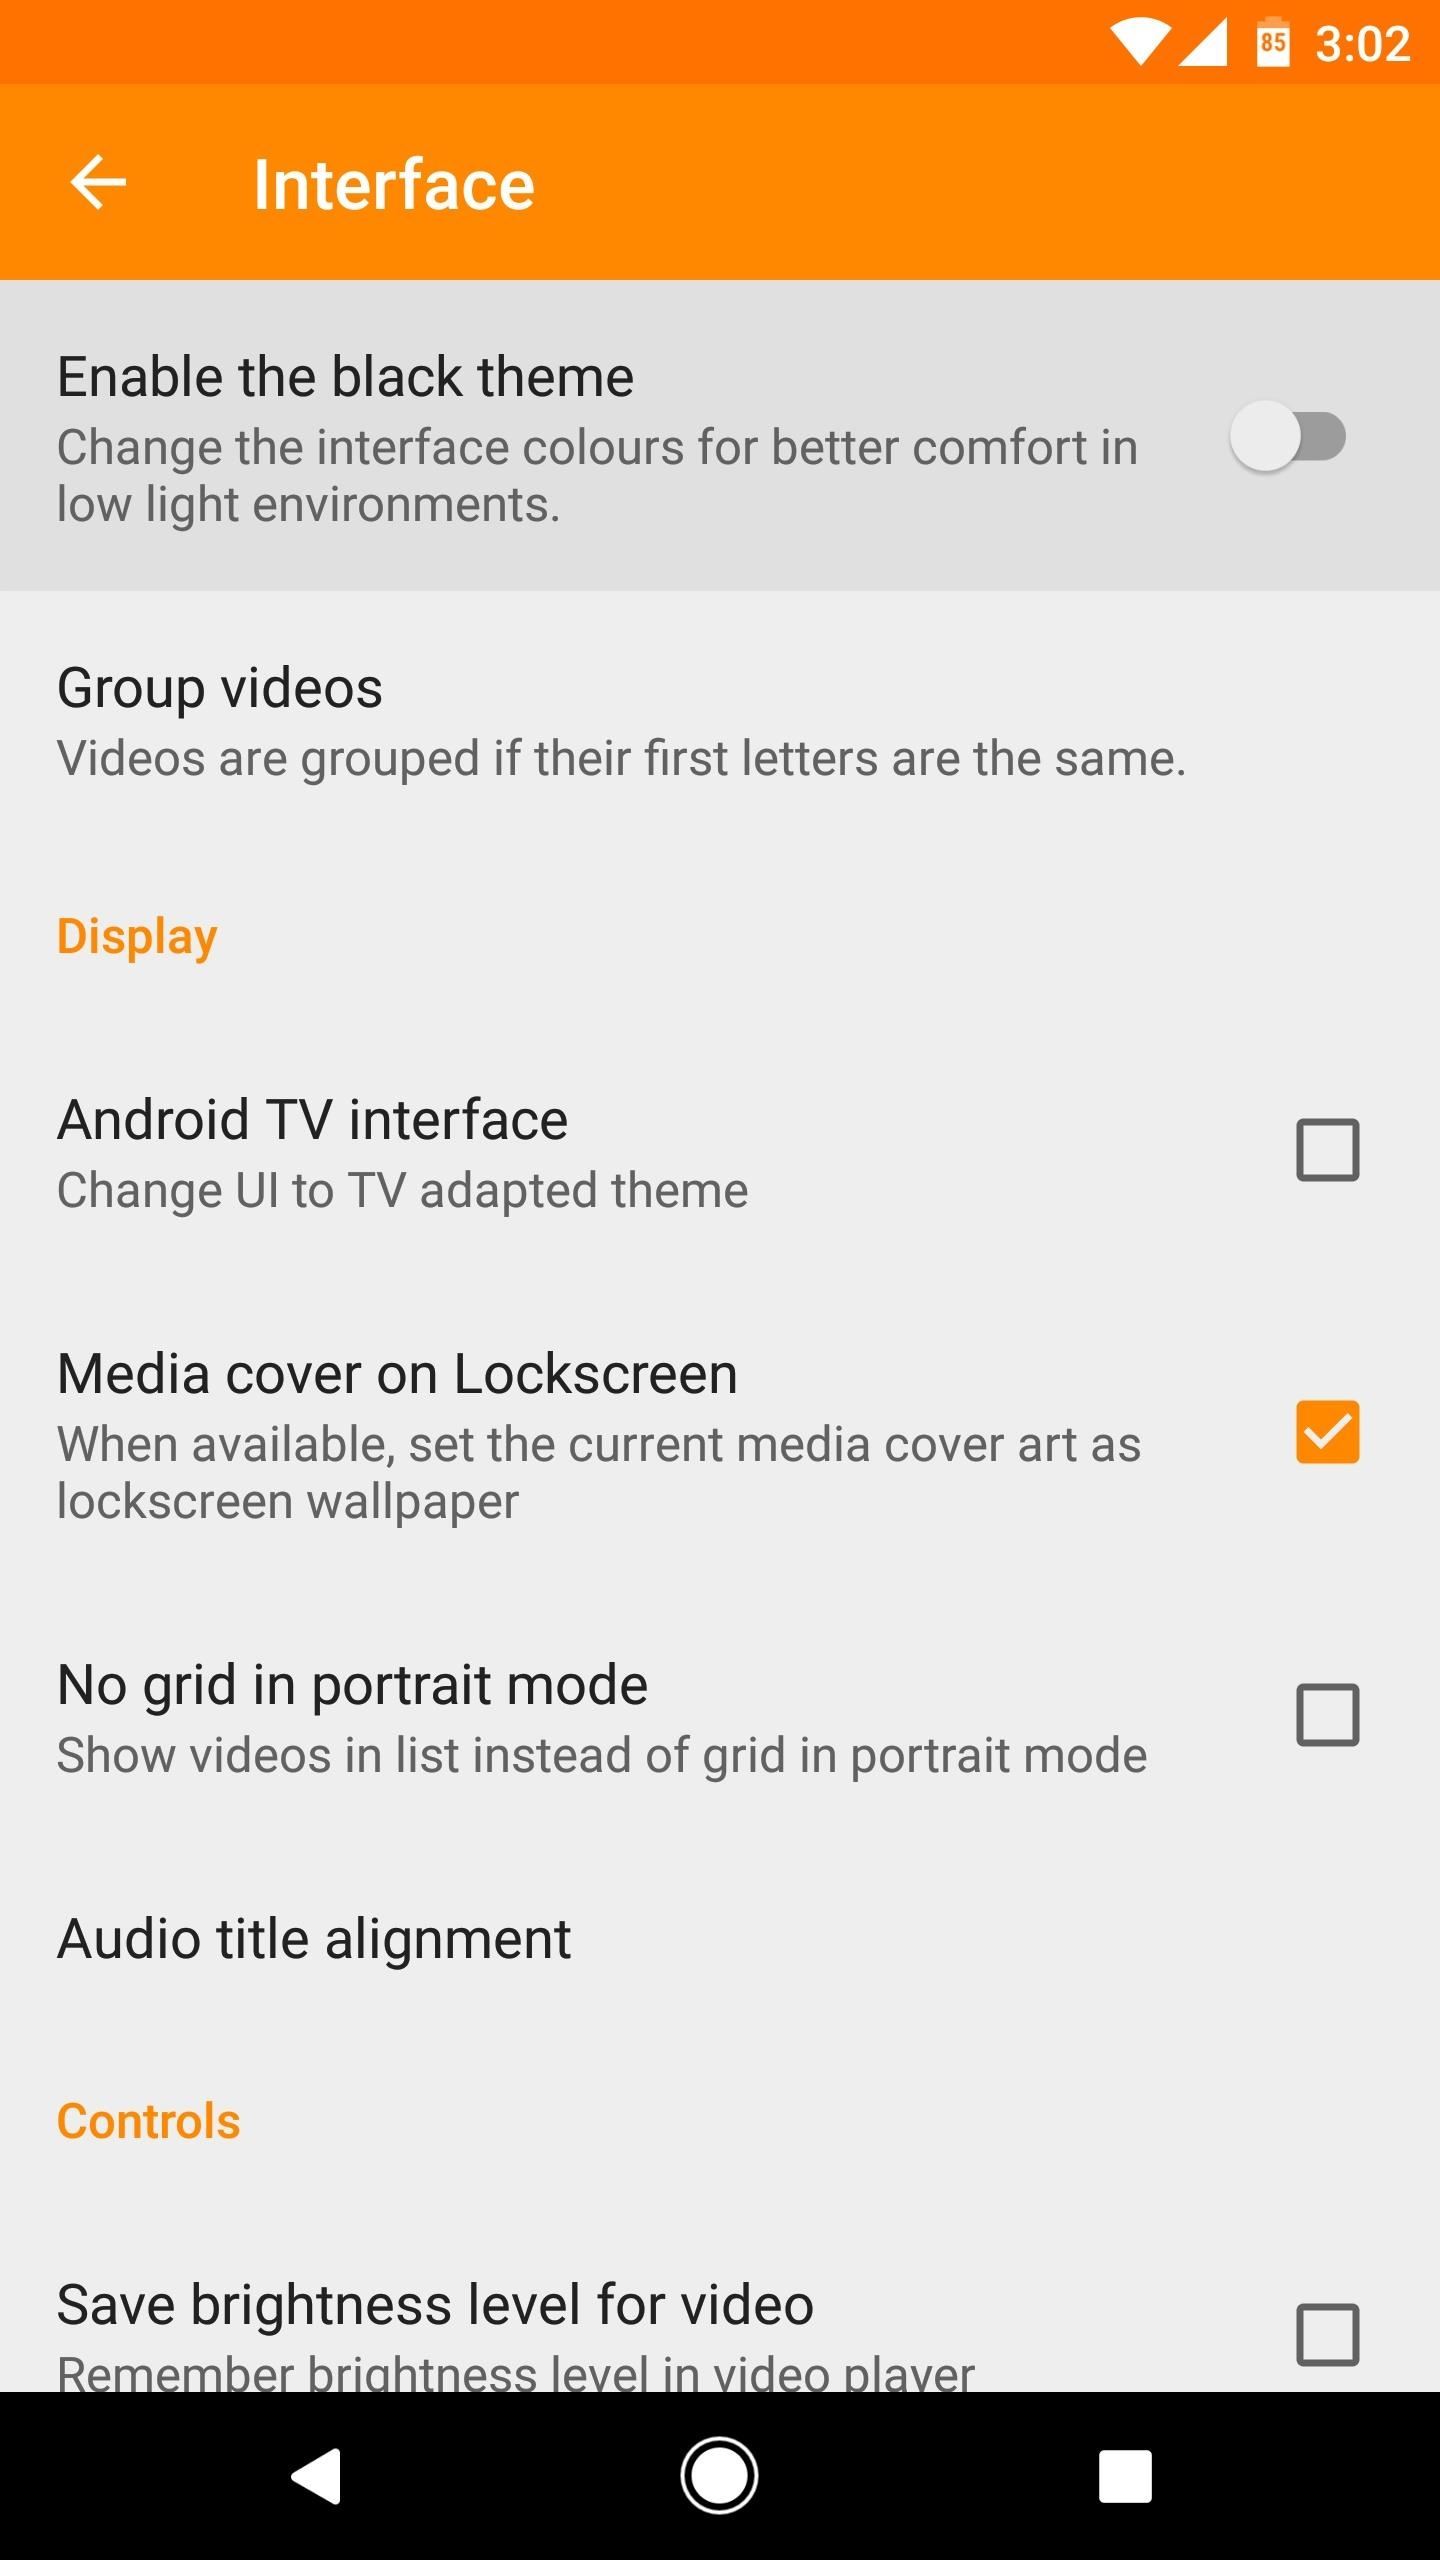 Get VLC's Dark Mode on Android & Save Your Eyes at Night